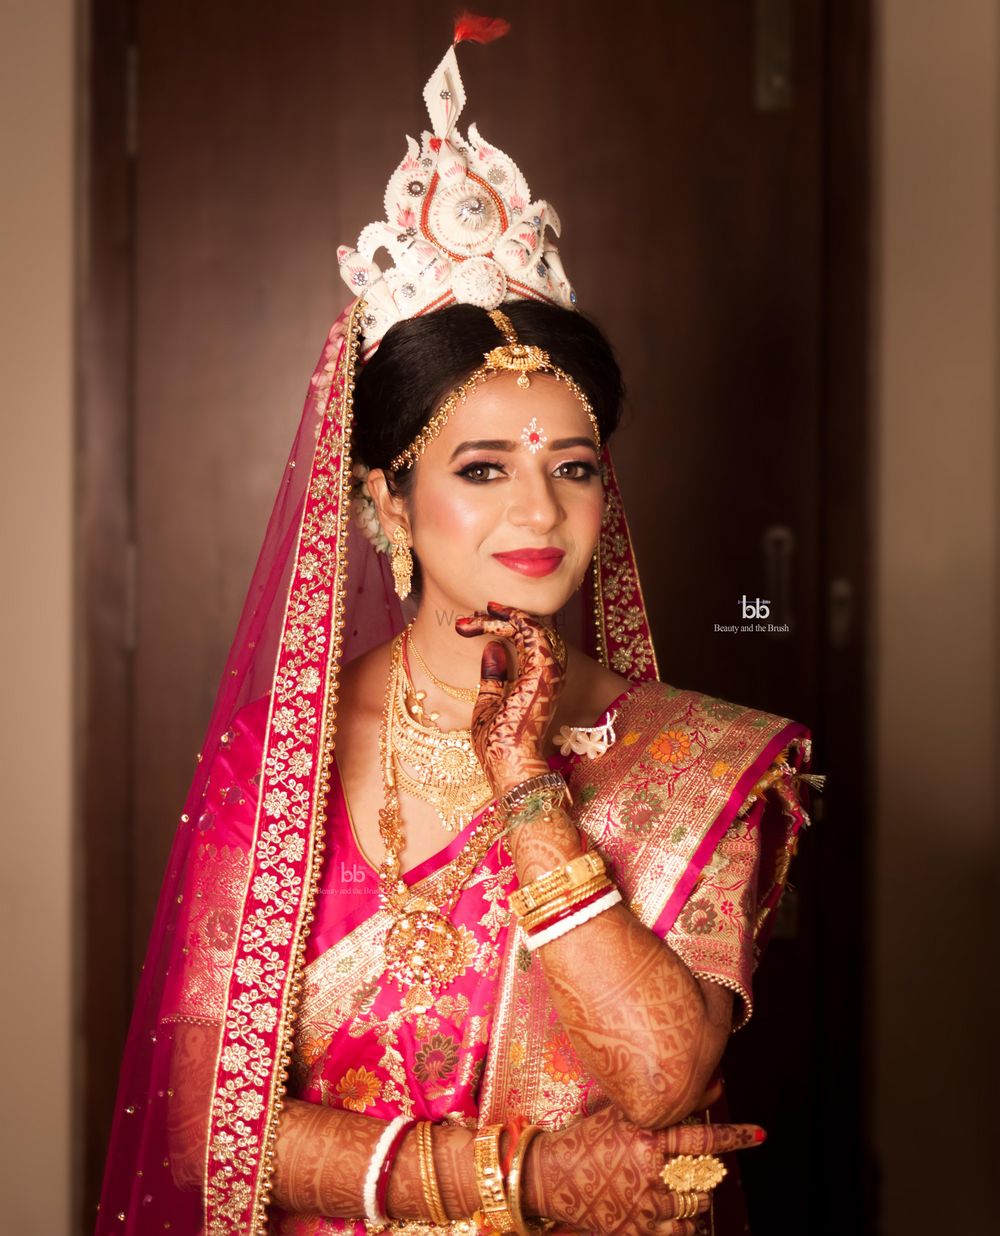 Photo By Beauty and the Brush- Makeup by Sutapa - Bridal Makeup